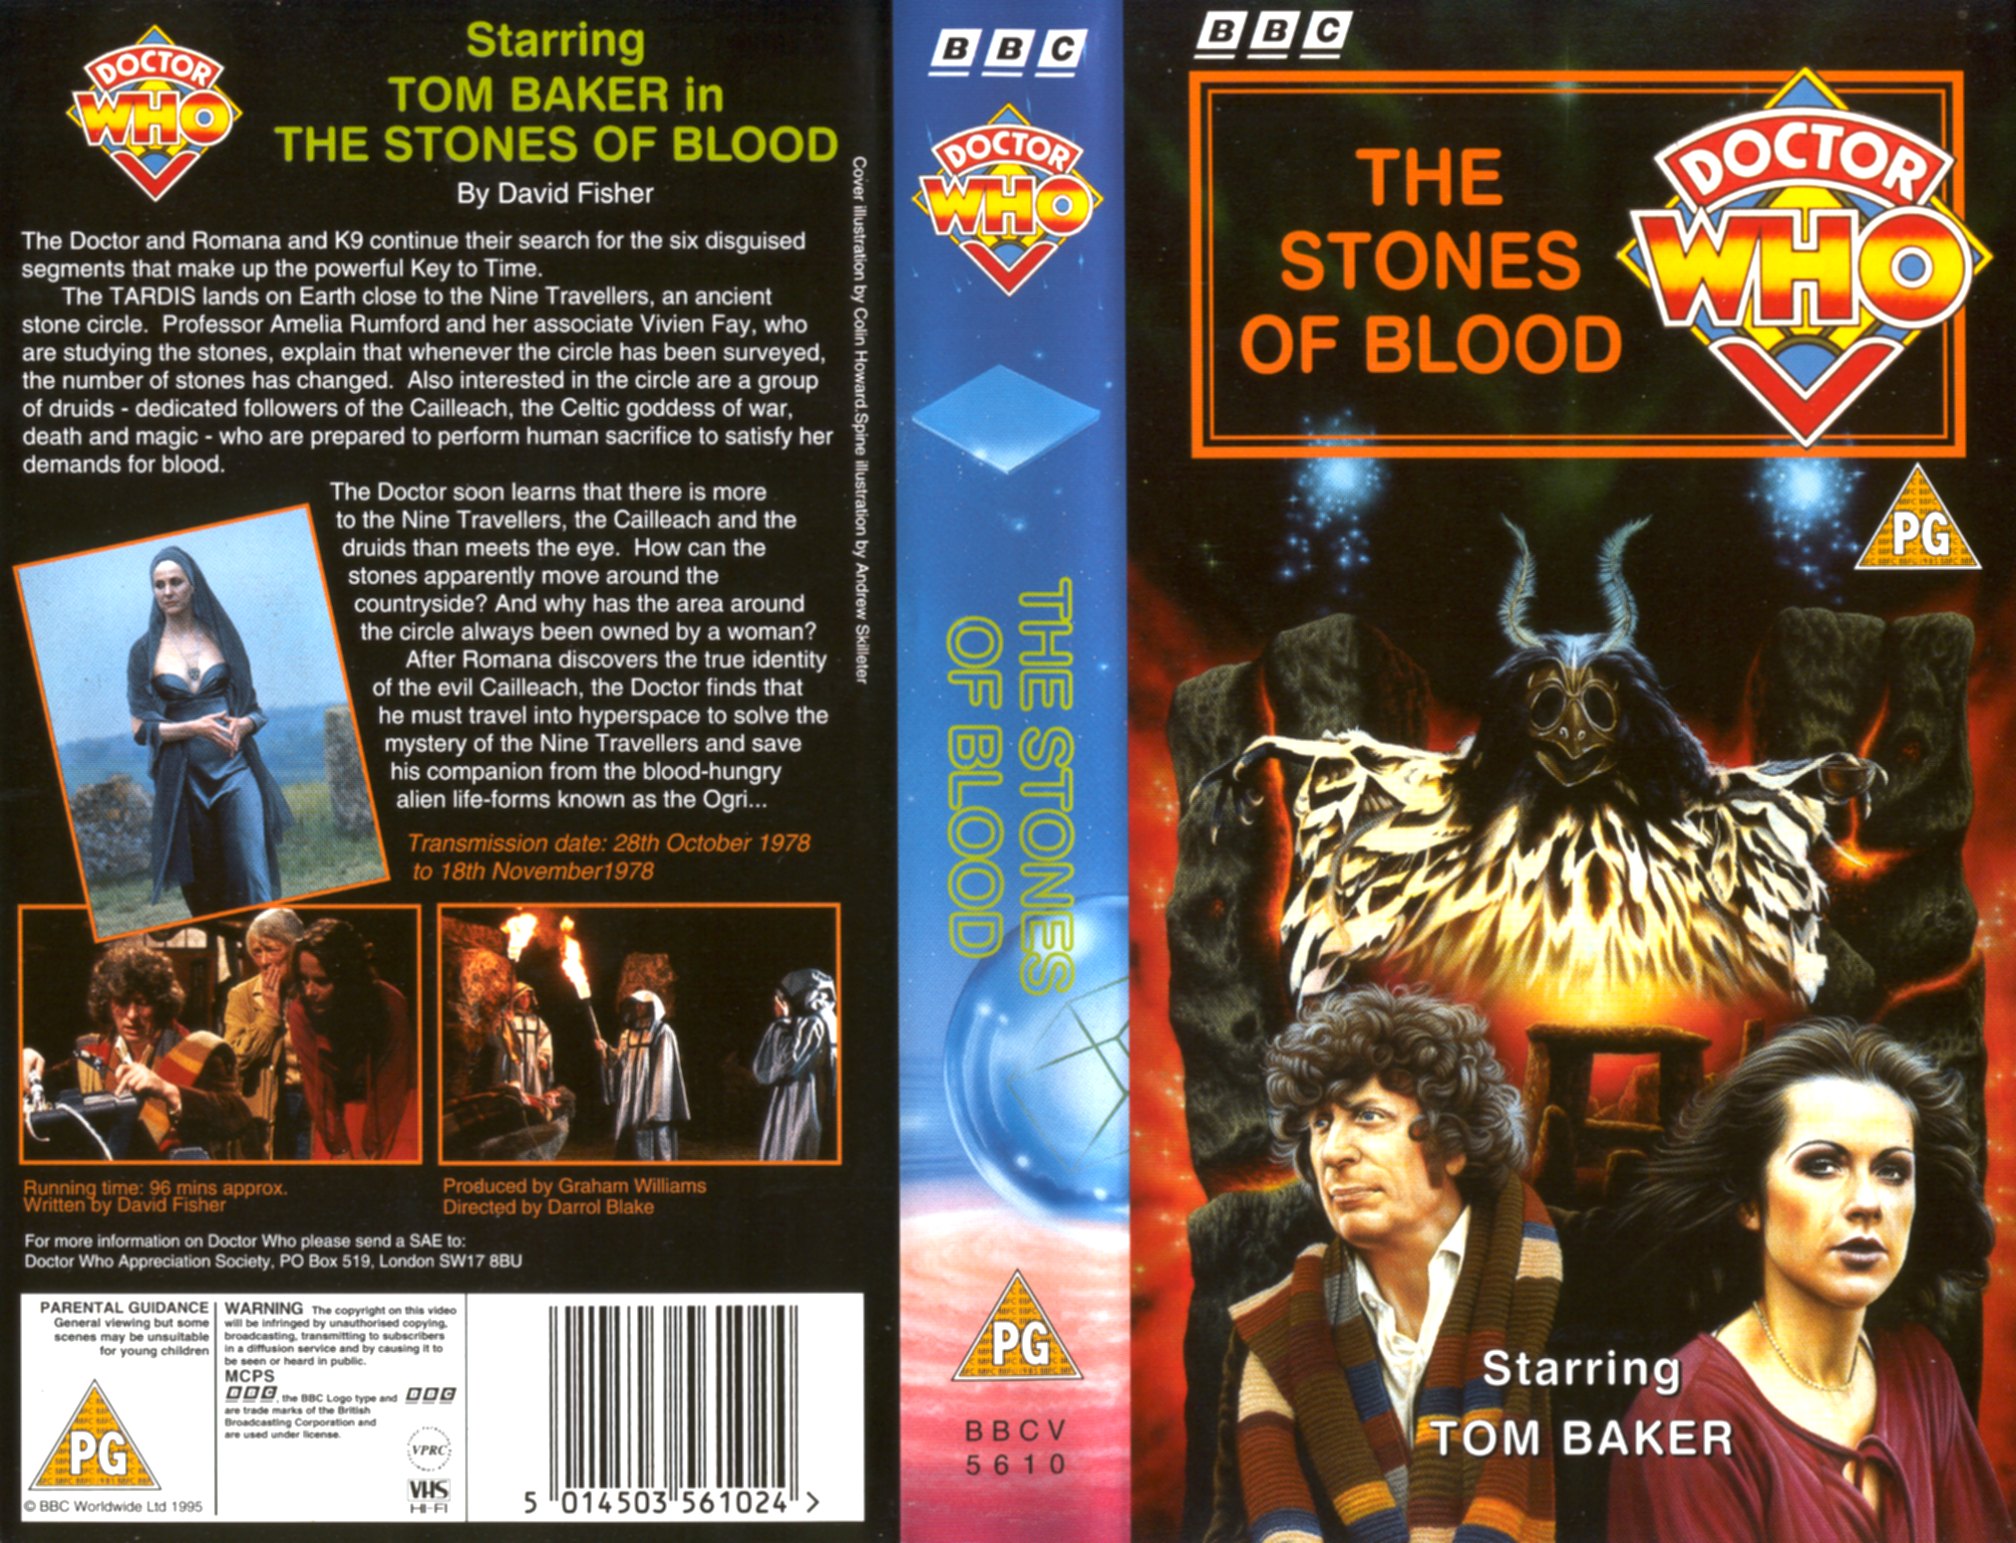 The Stones of Blood